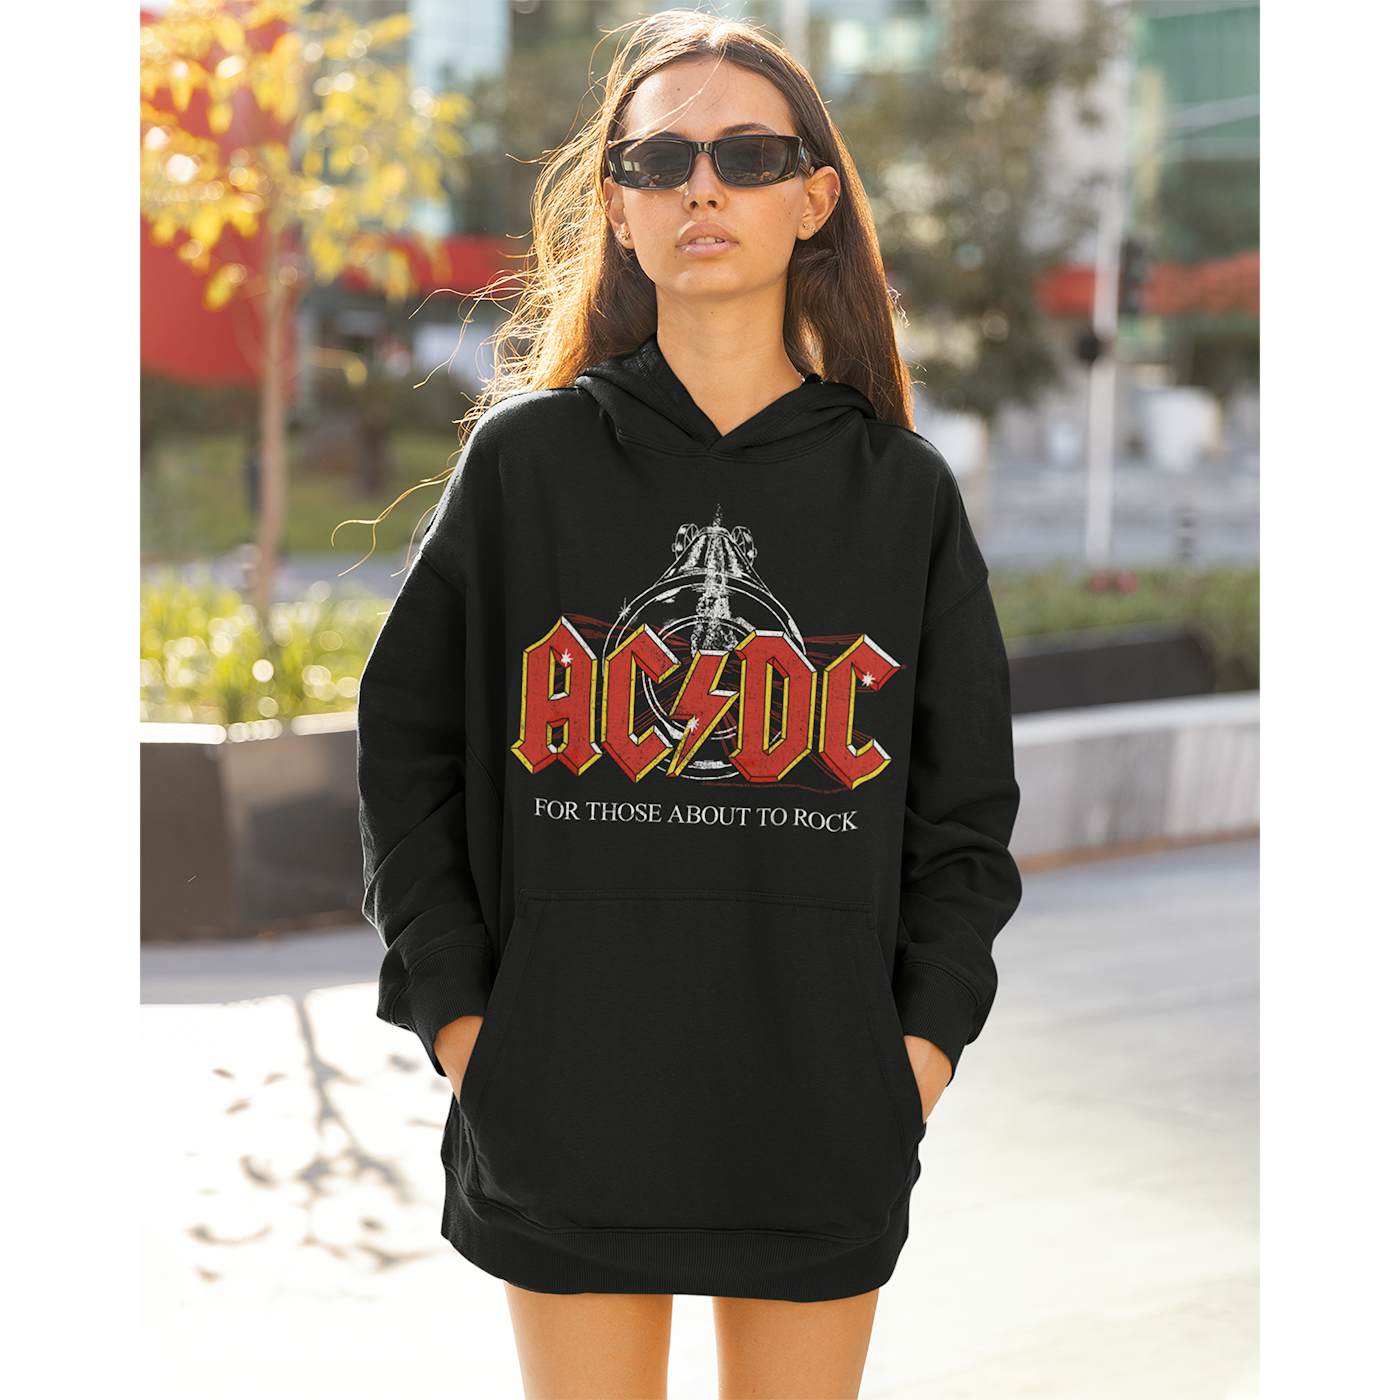 Distressed Hoodie About AC/DC Cannon Those Shot To | Rock For Hoodie